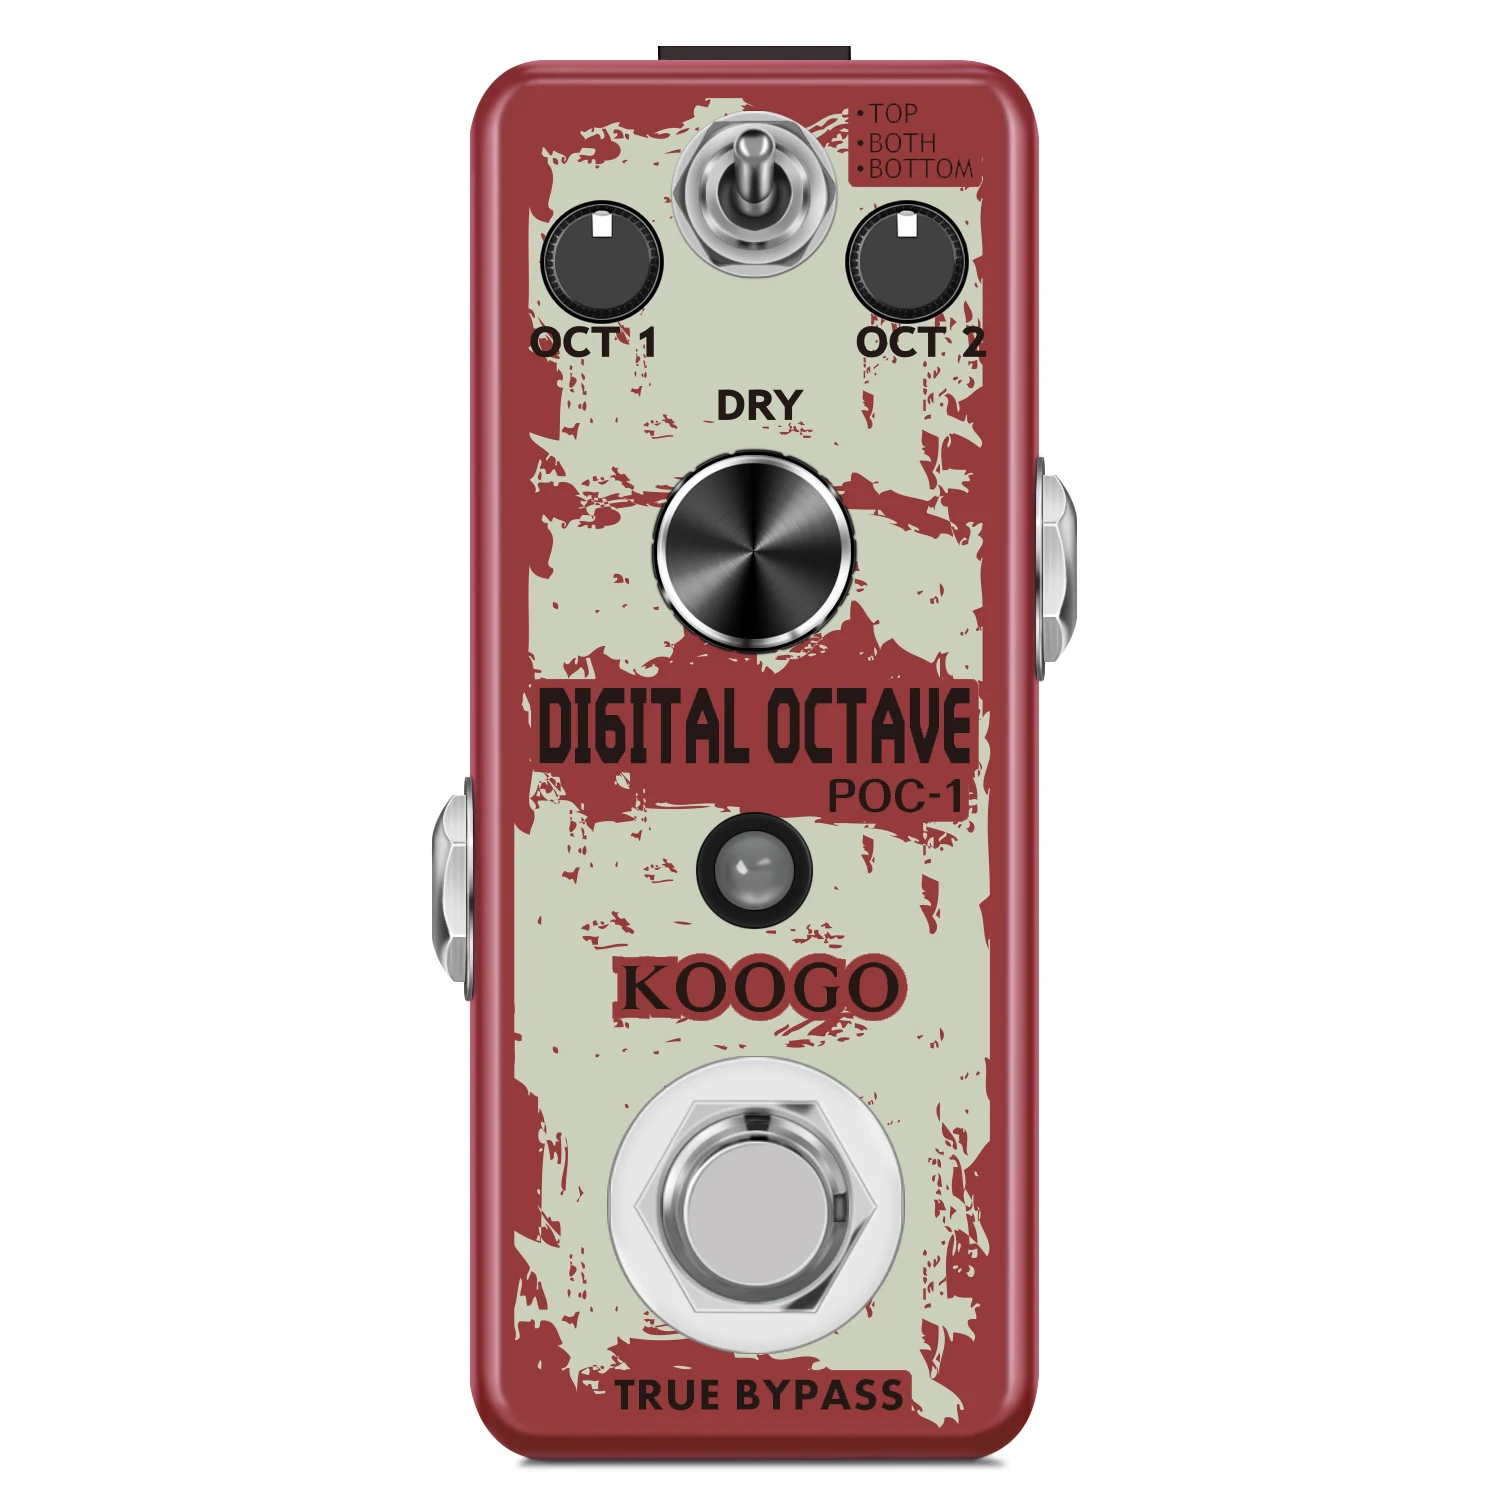 KOOGO LEF-3806 Pure Octpus Guitar Pedal Electric Guitars Digital Octave Pedals 11 Different Octaves Modes Precise Polyphonic Oct enlarge